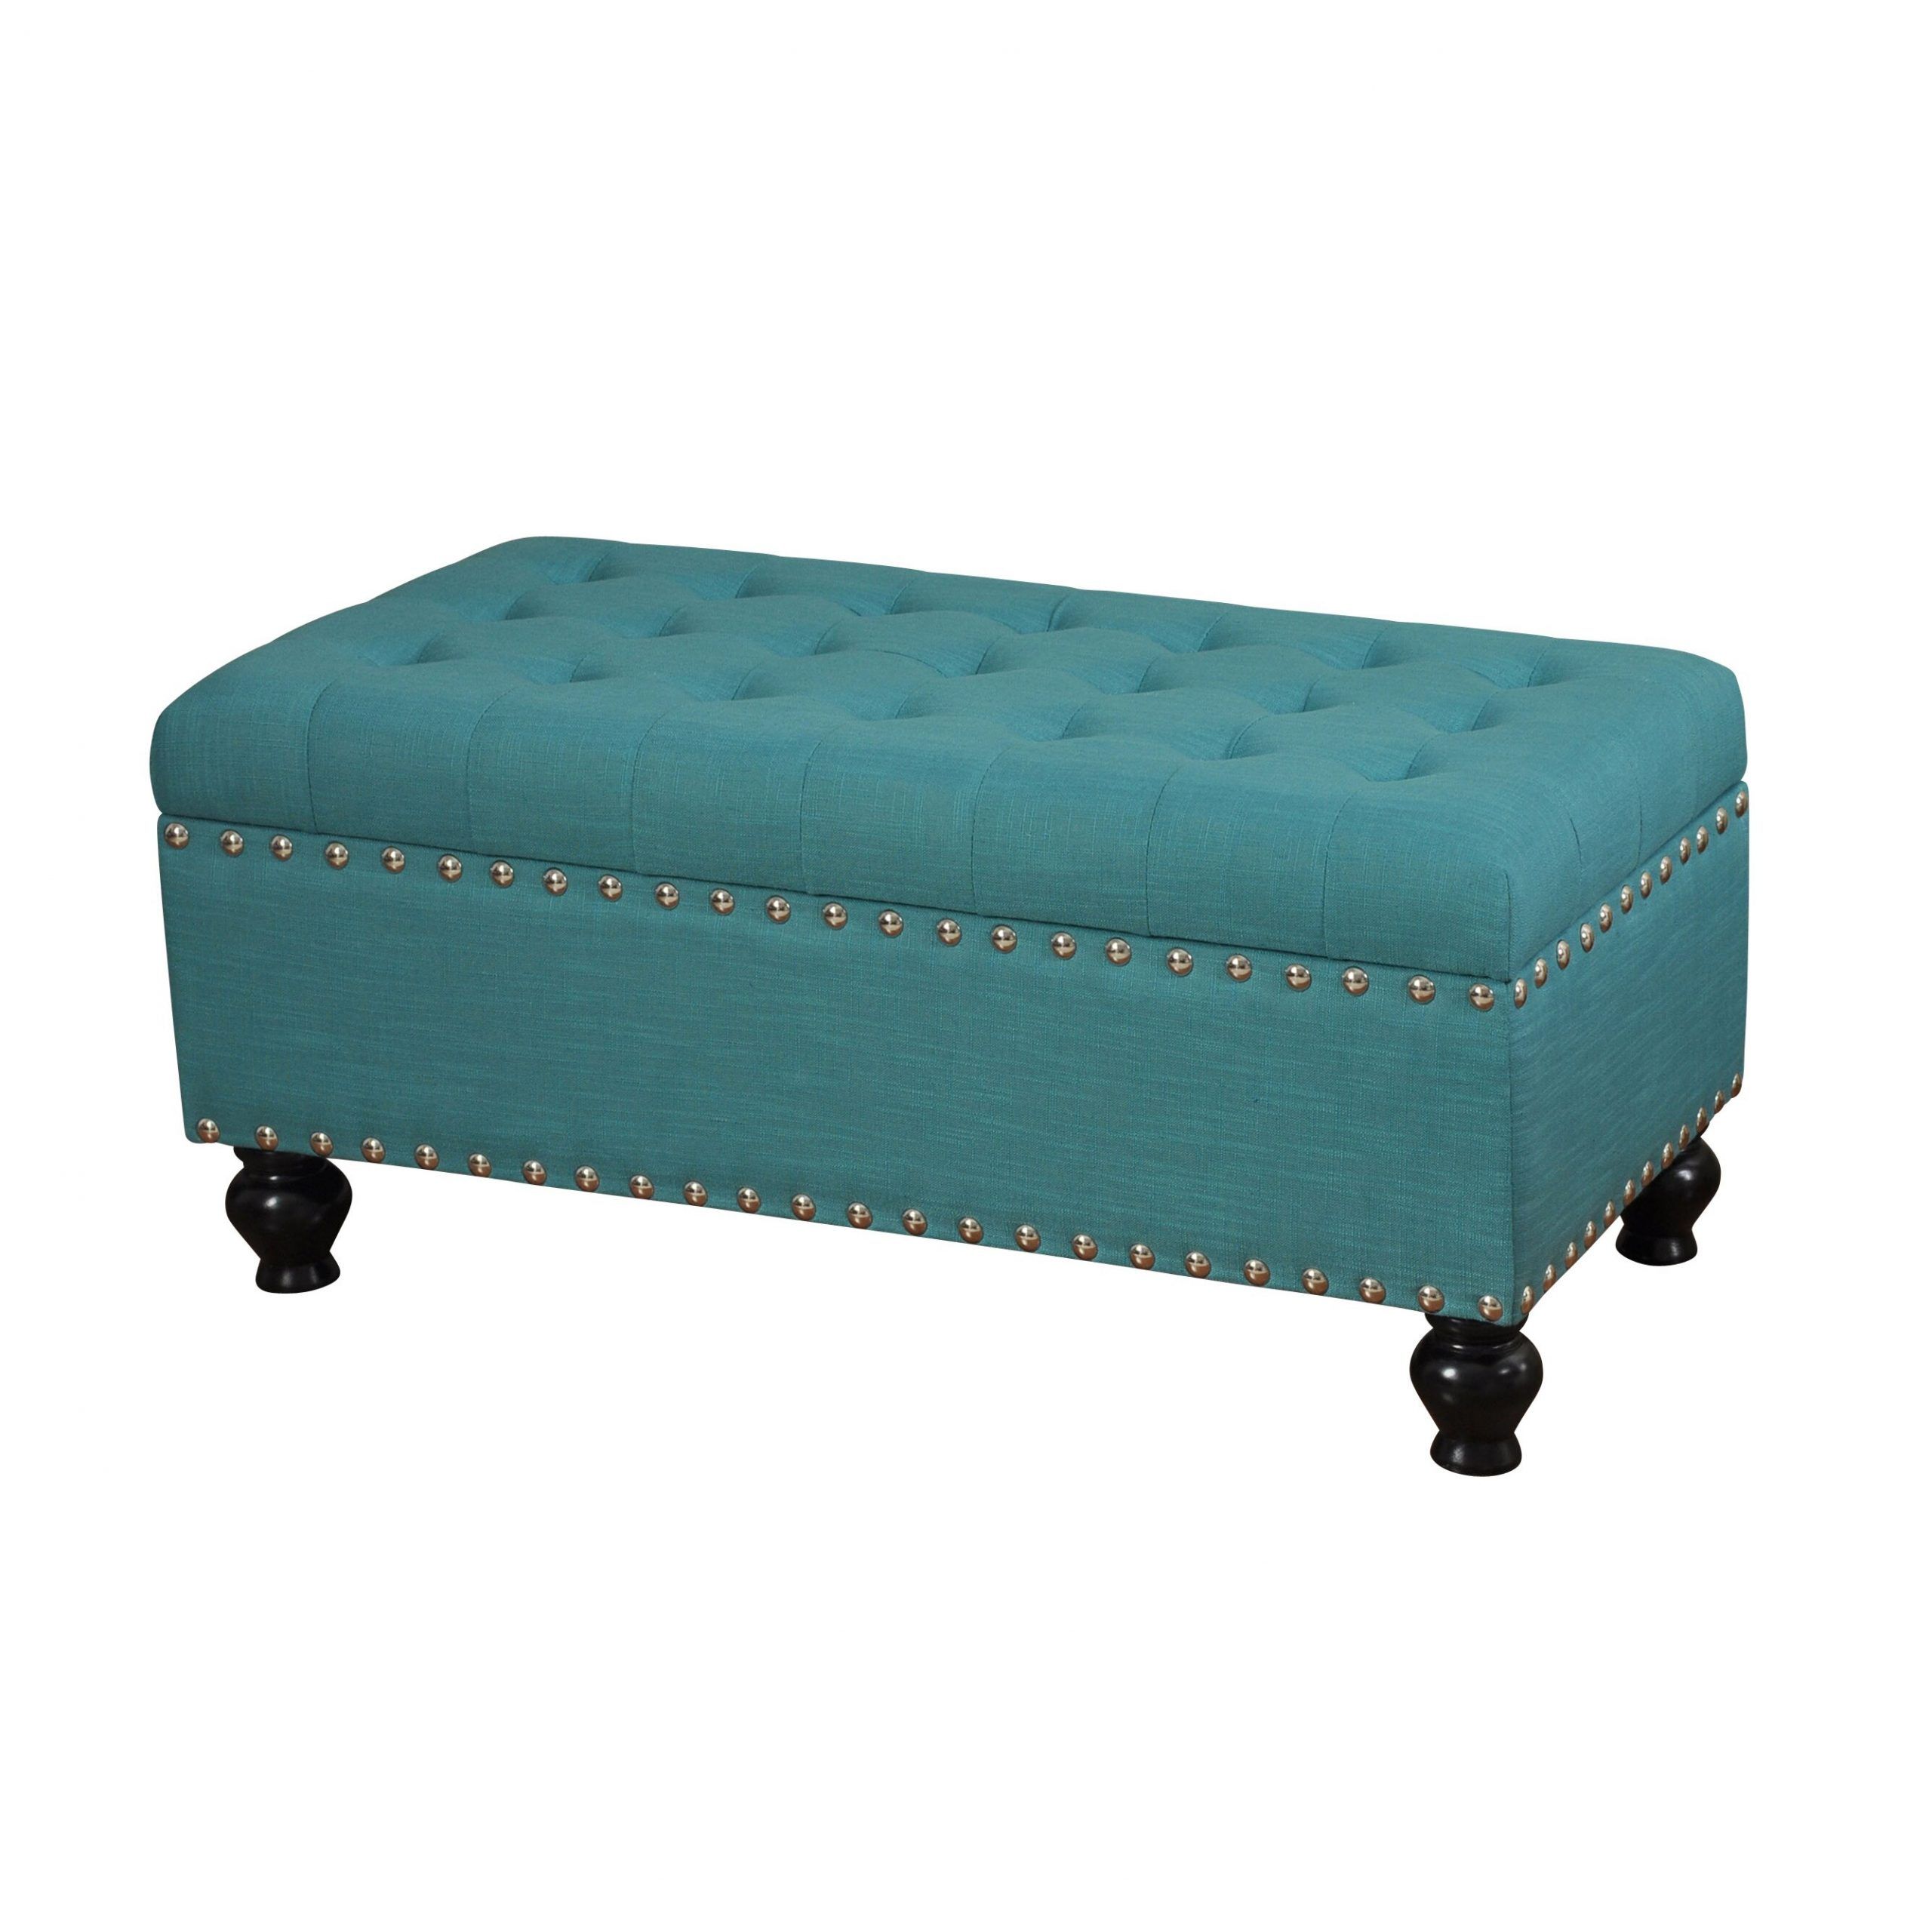 Style Craft Tufted Storage Ottoman & Reviews | Wayfair With Gray Velvet Tufted Storage Ottomans (View 5 of 20)